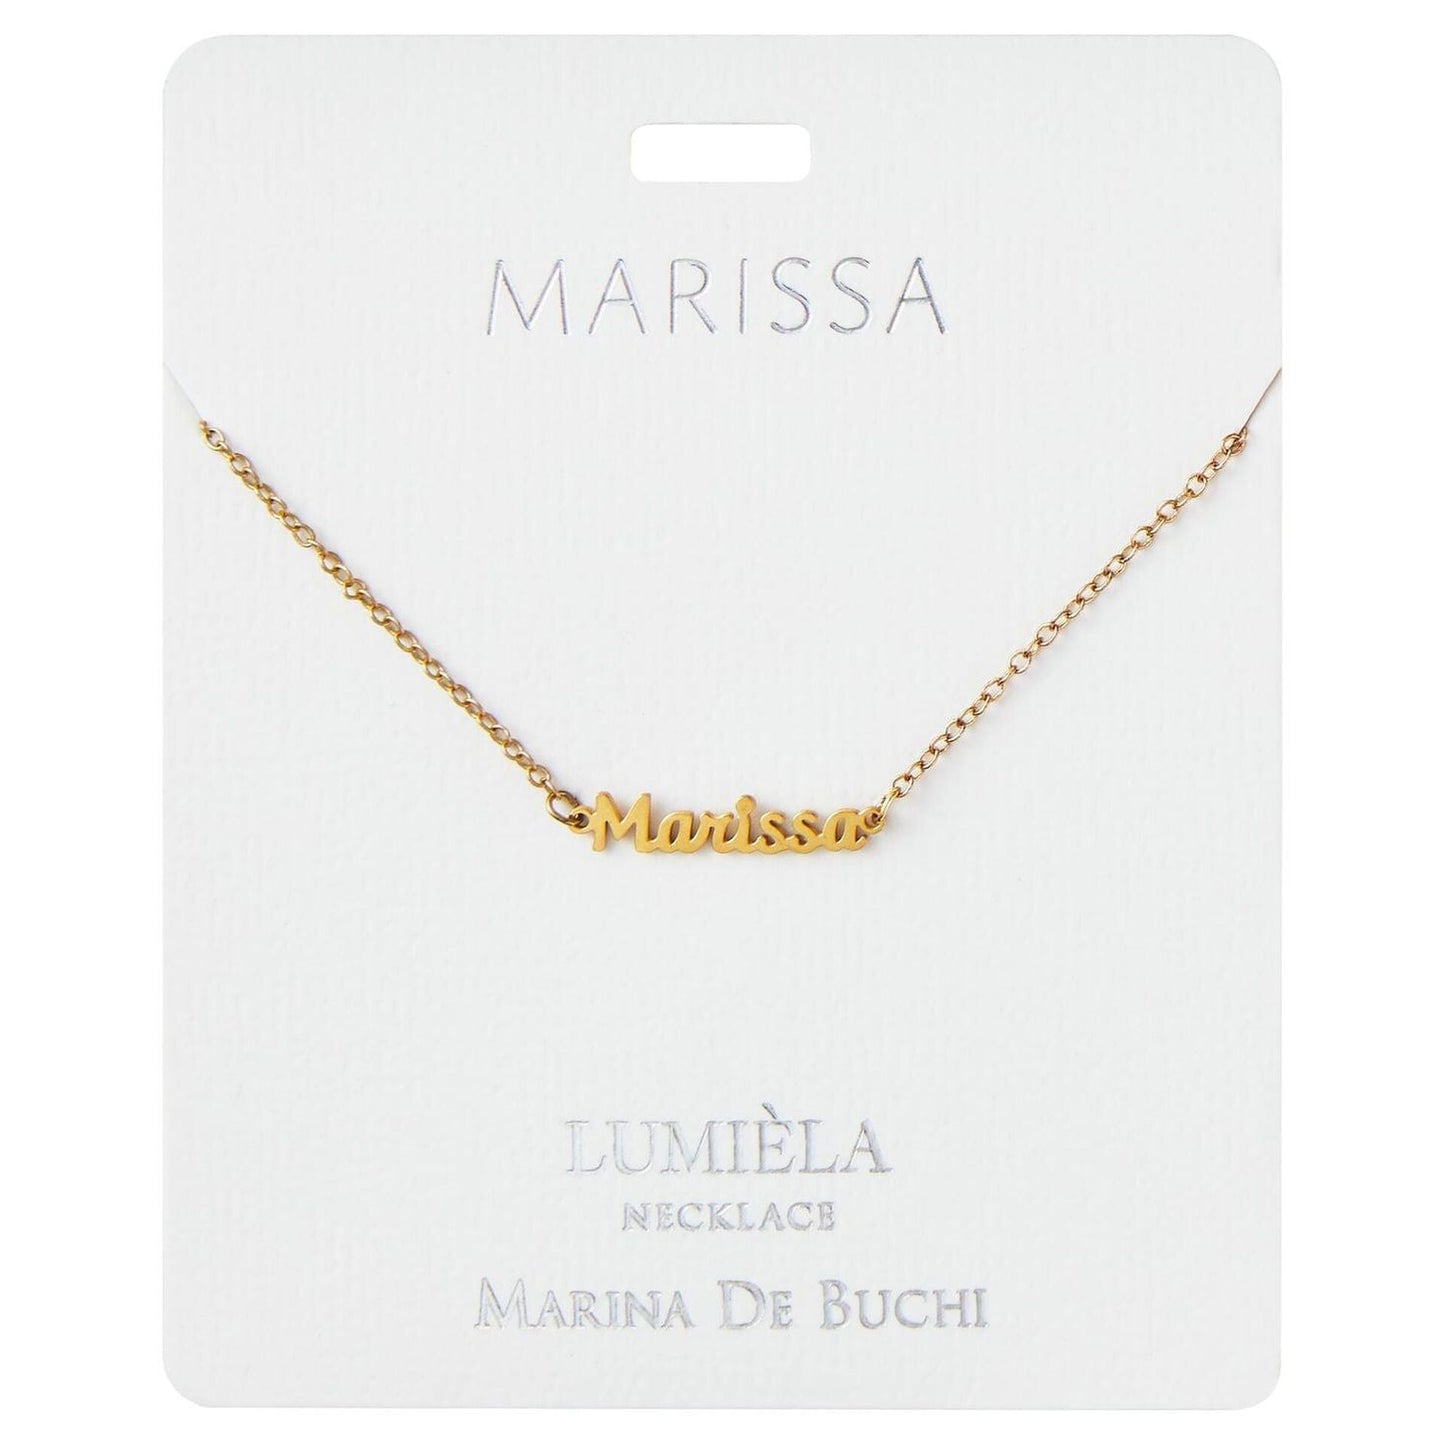 Lumiela Personalized Nameplate Kimberly Necklace in Gold Tone